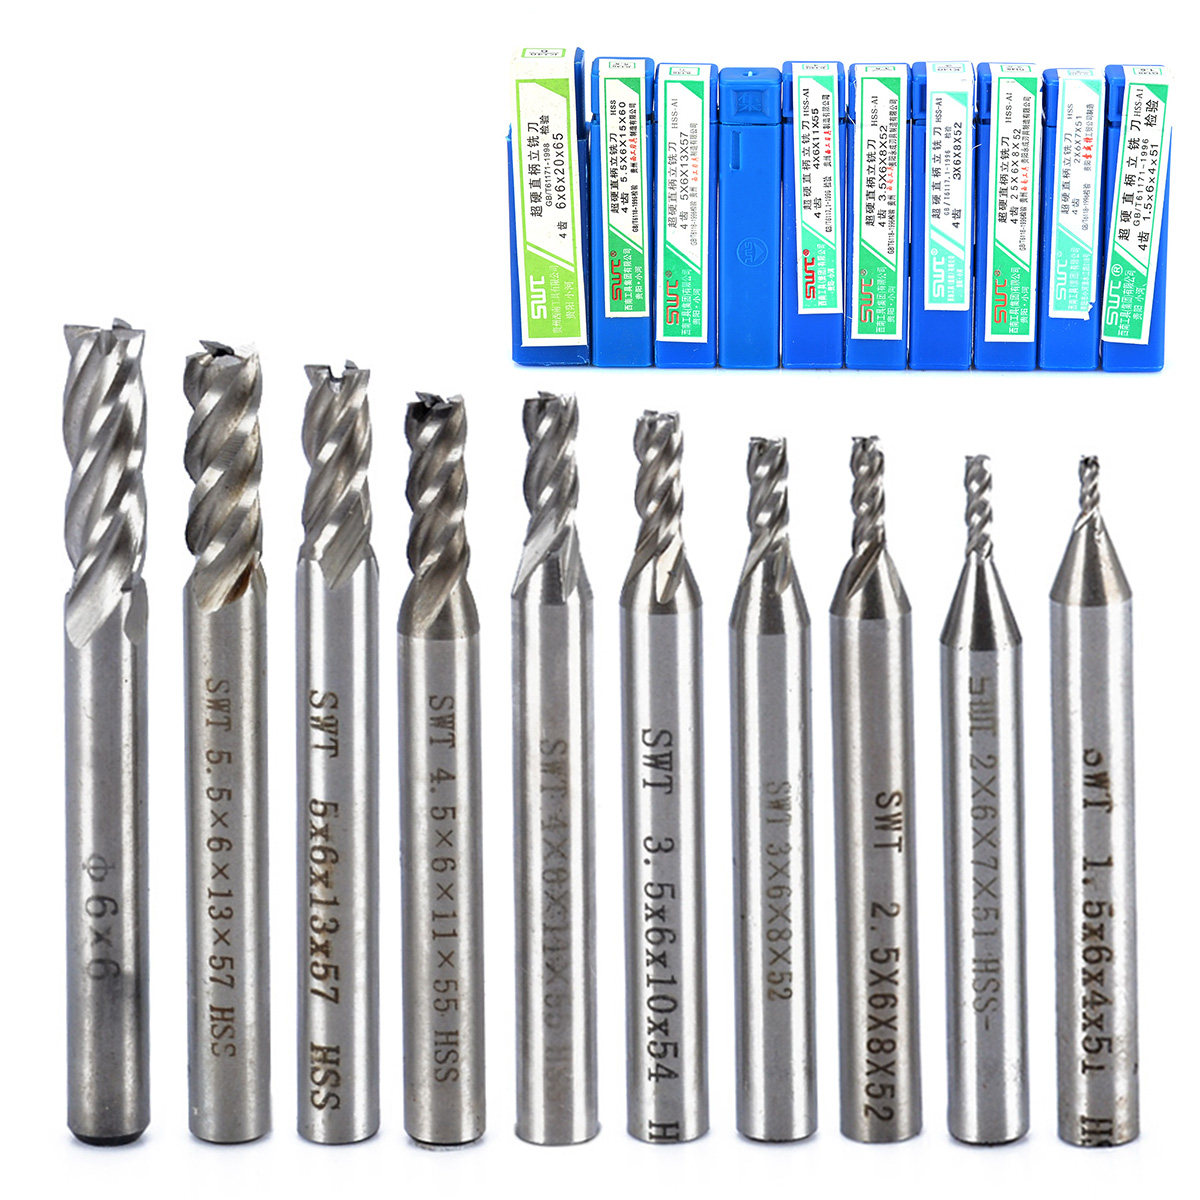 10Pcs 4mm Dual Flutes Metal Straight Router Bit Cutter with 4mm Shank 